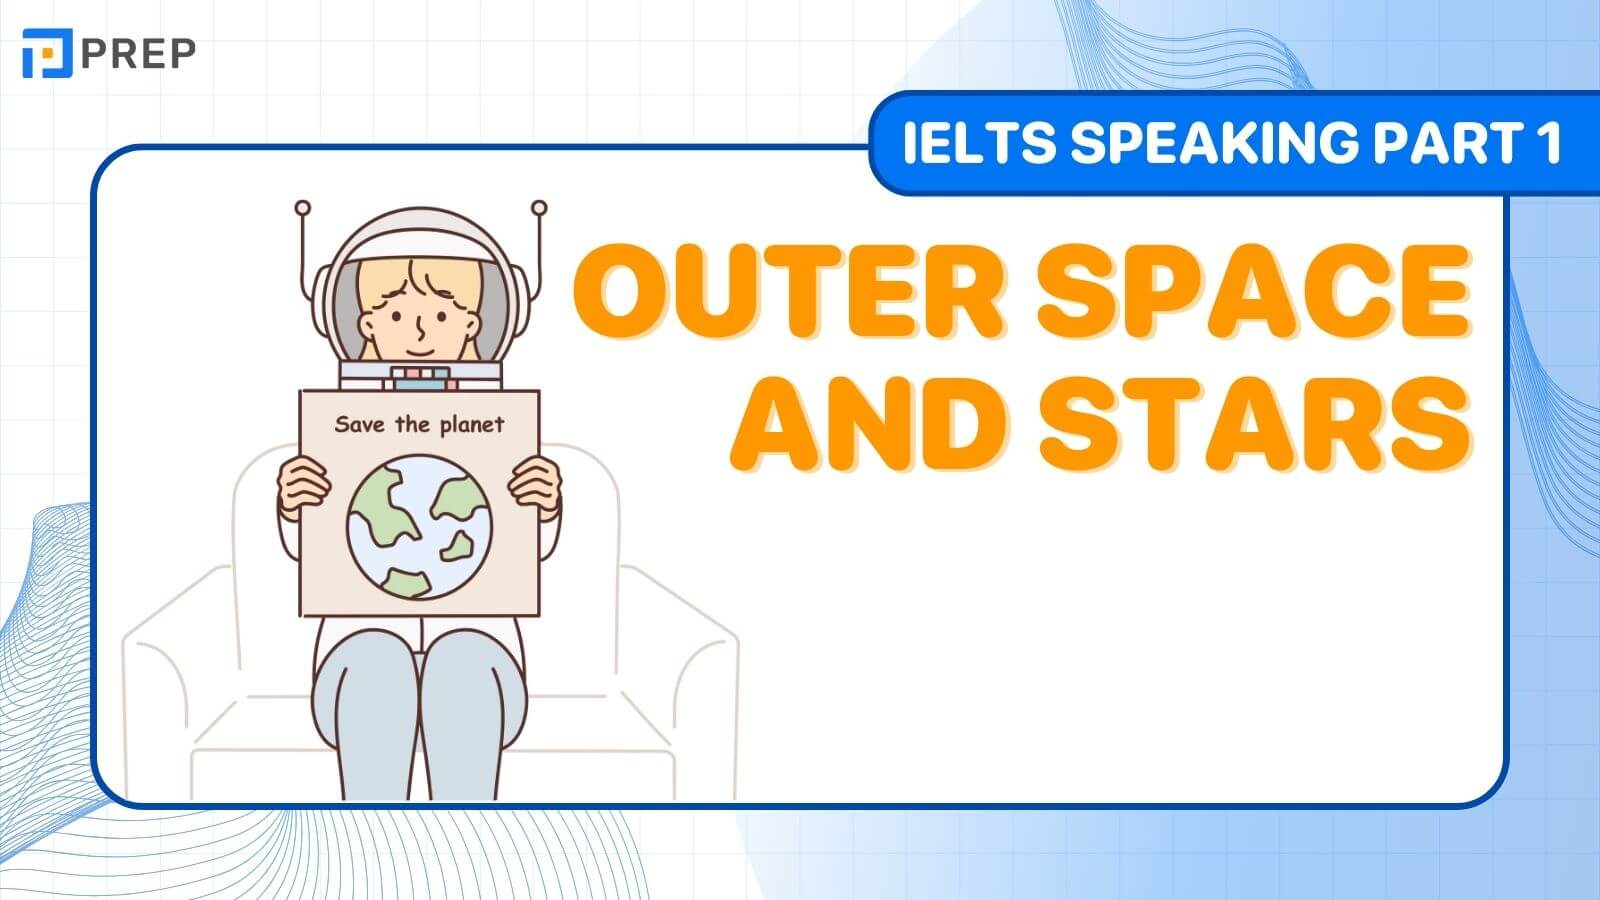 IELTS Speaking Part 1 Outer space and stars